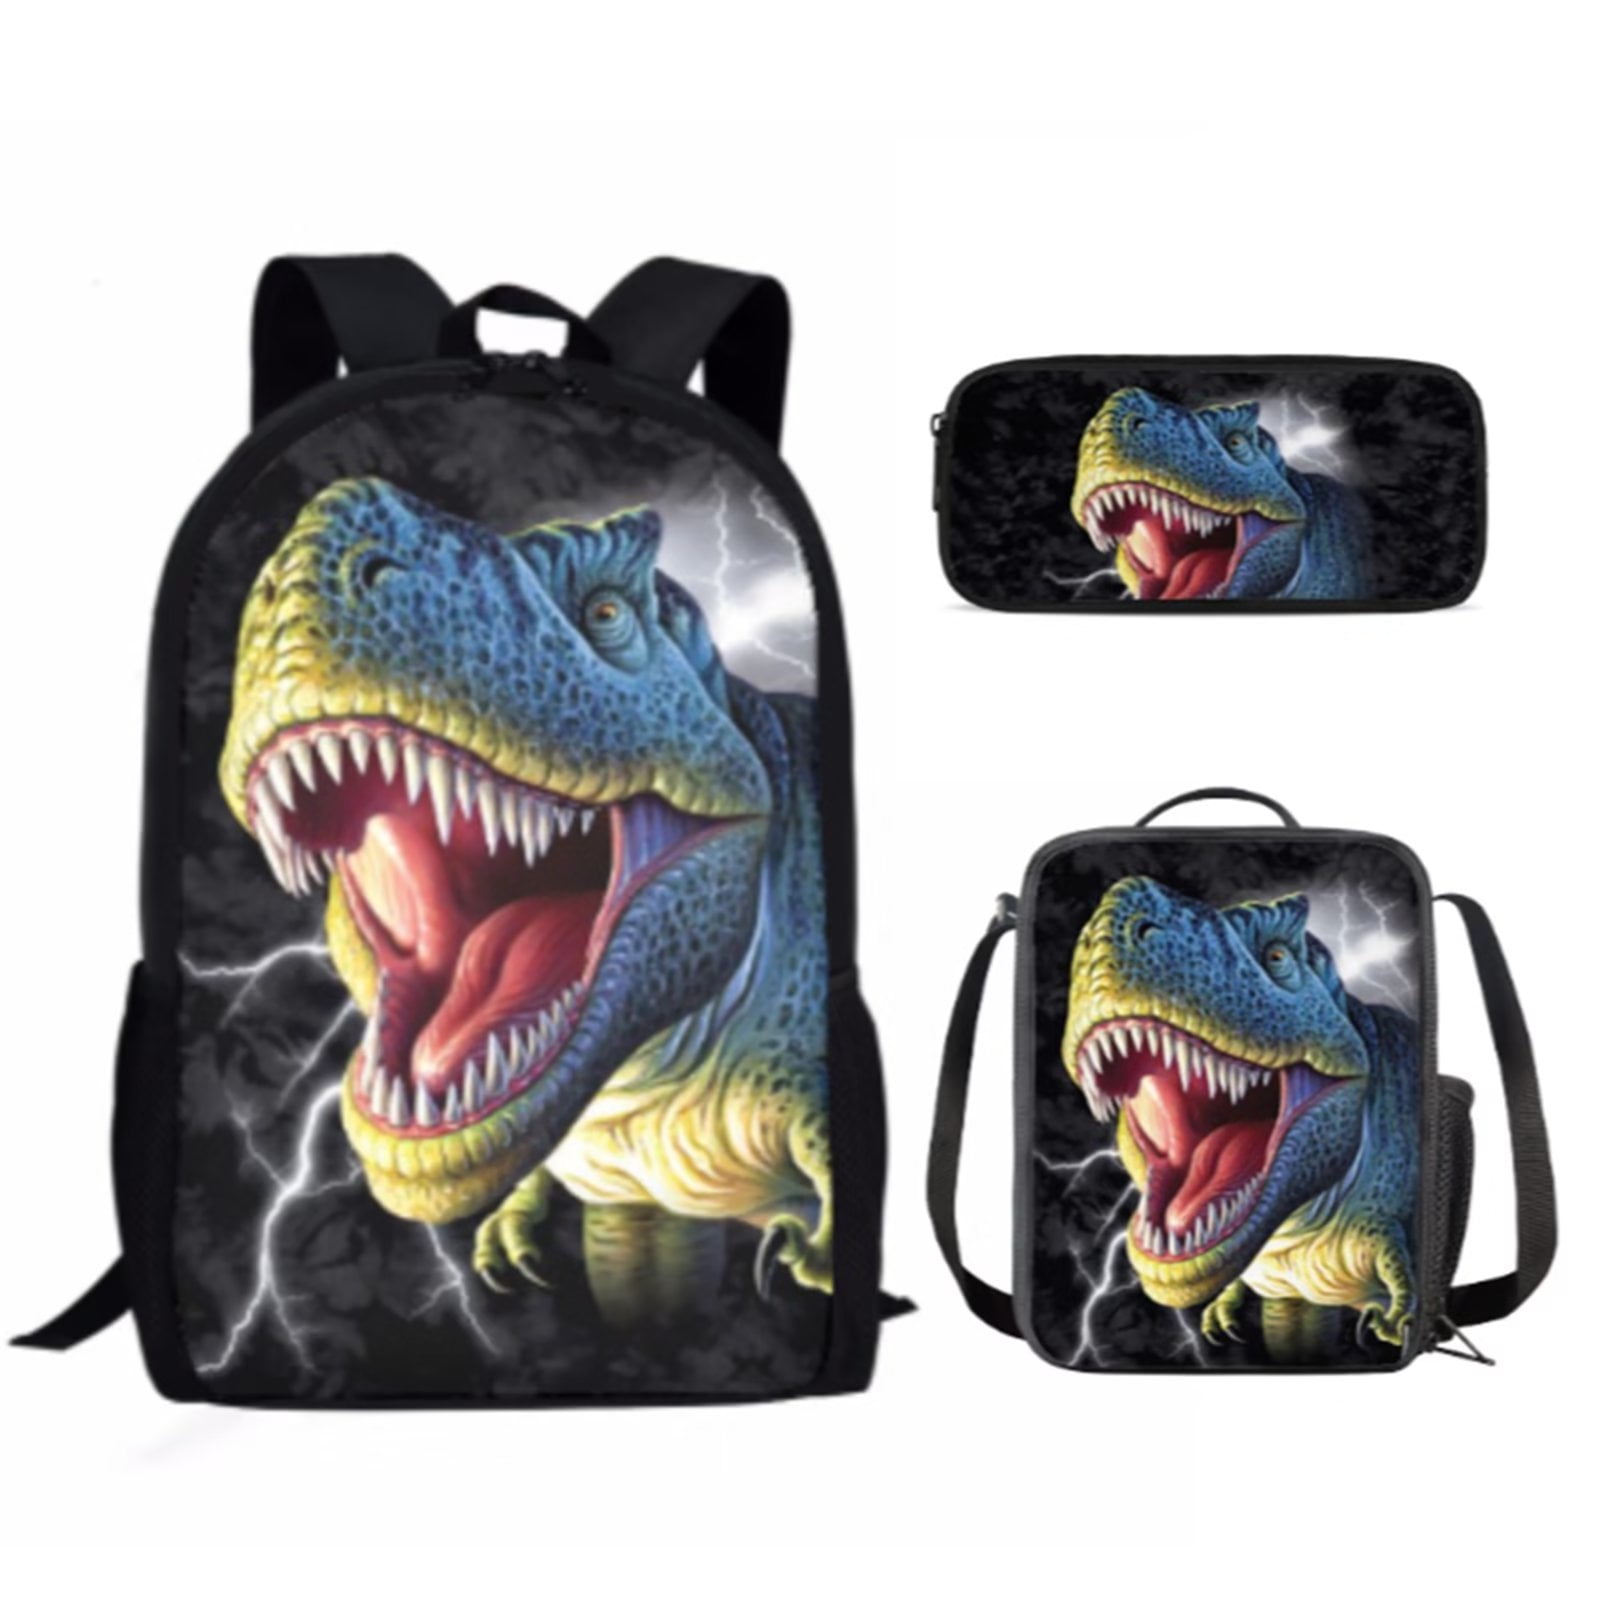 Renewold 3Pcs Dinosaur School Bag for Teens Boys with Thermal Lunch Box ...